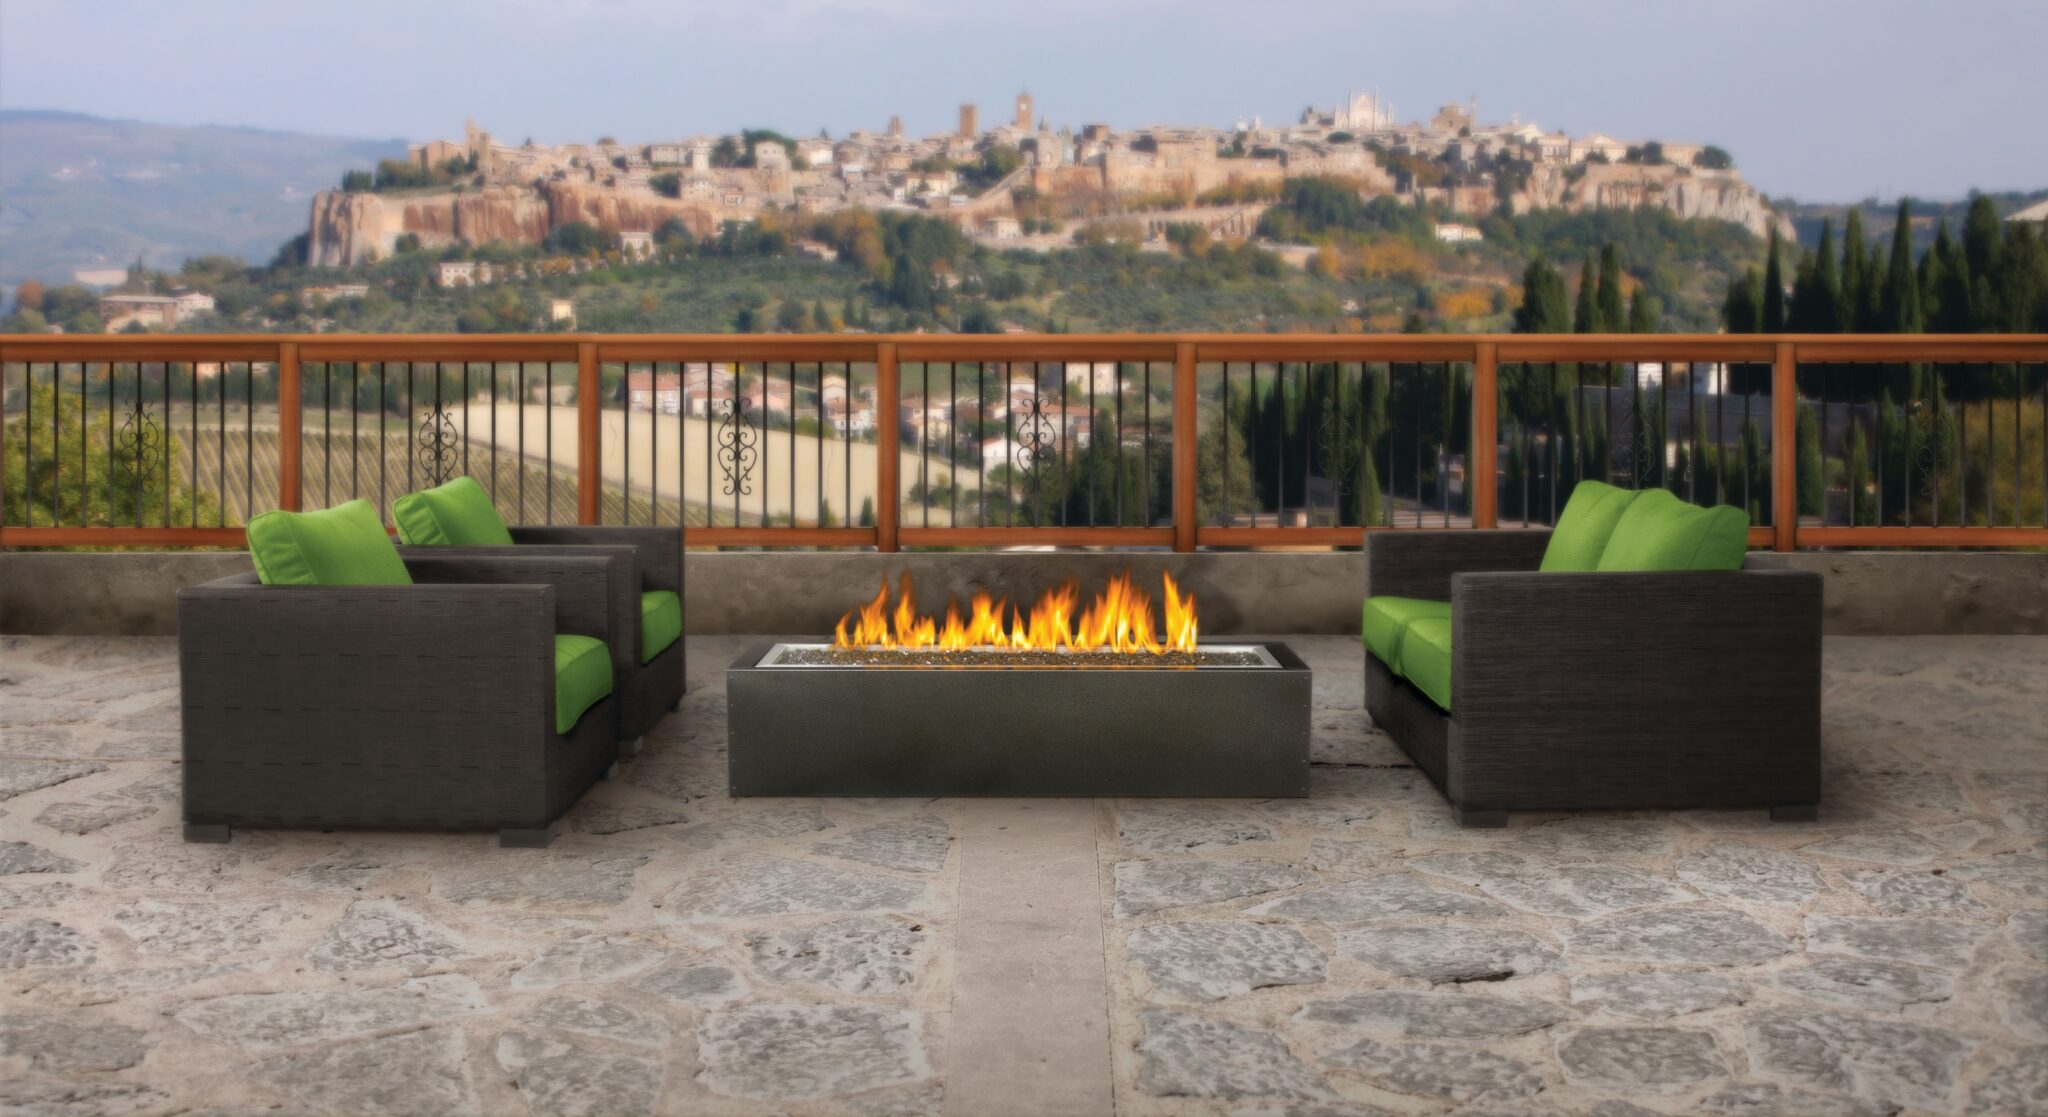 Sleek, minimalist patio furniture with a fire table is one of our top 5 patio decor trends.